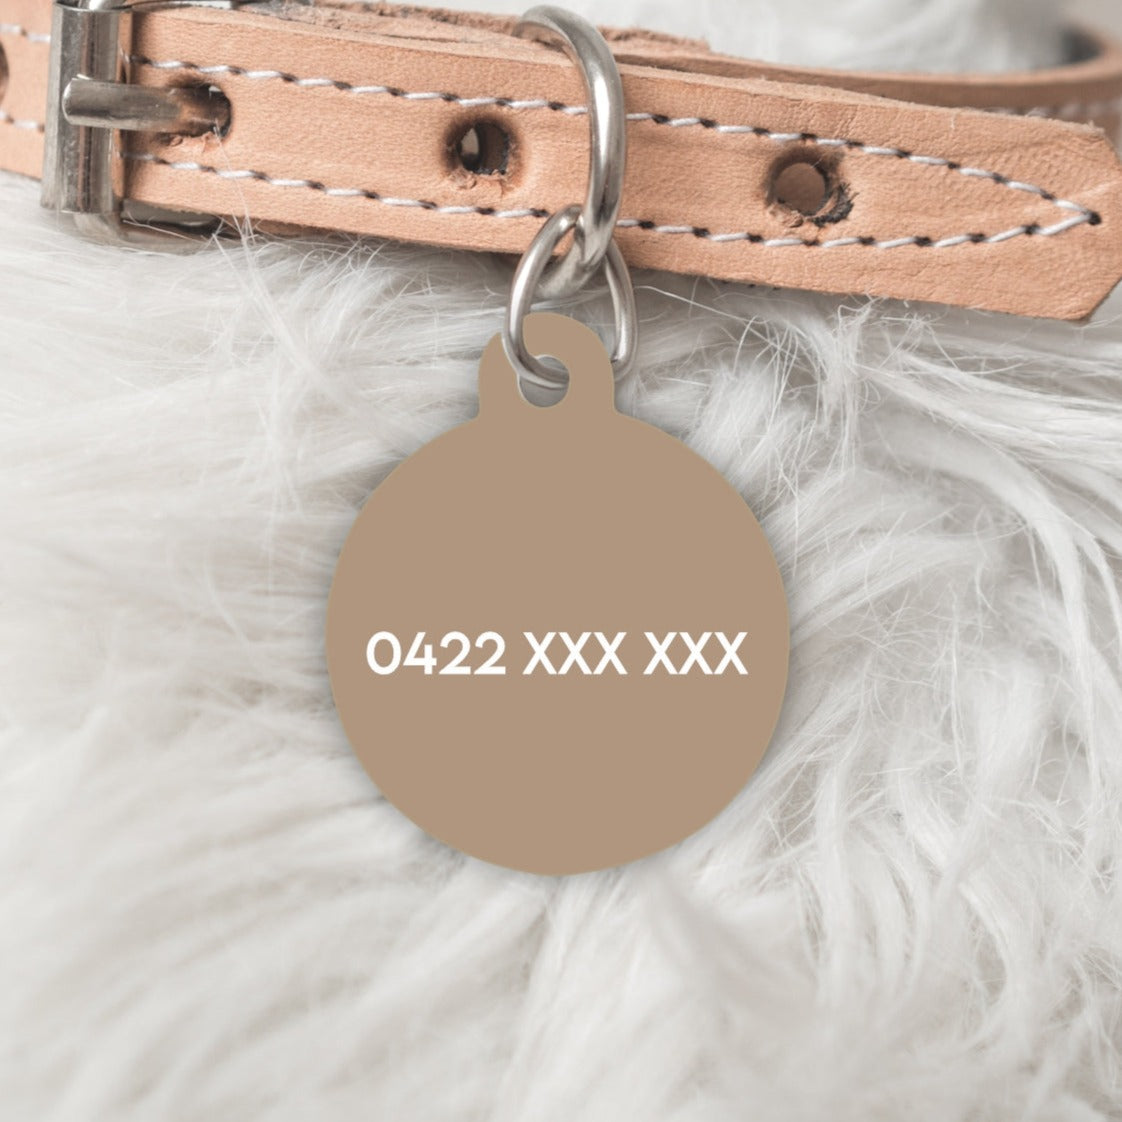 Back of brown dog tag with pet owners phone number